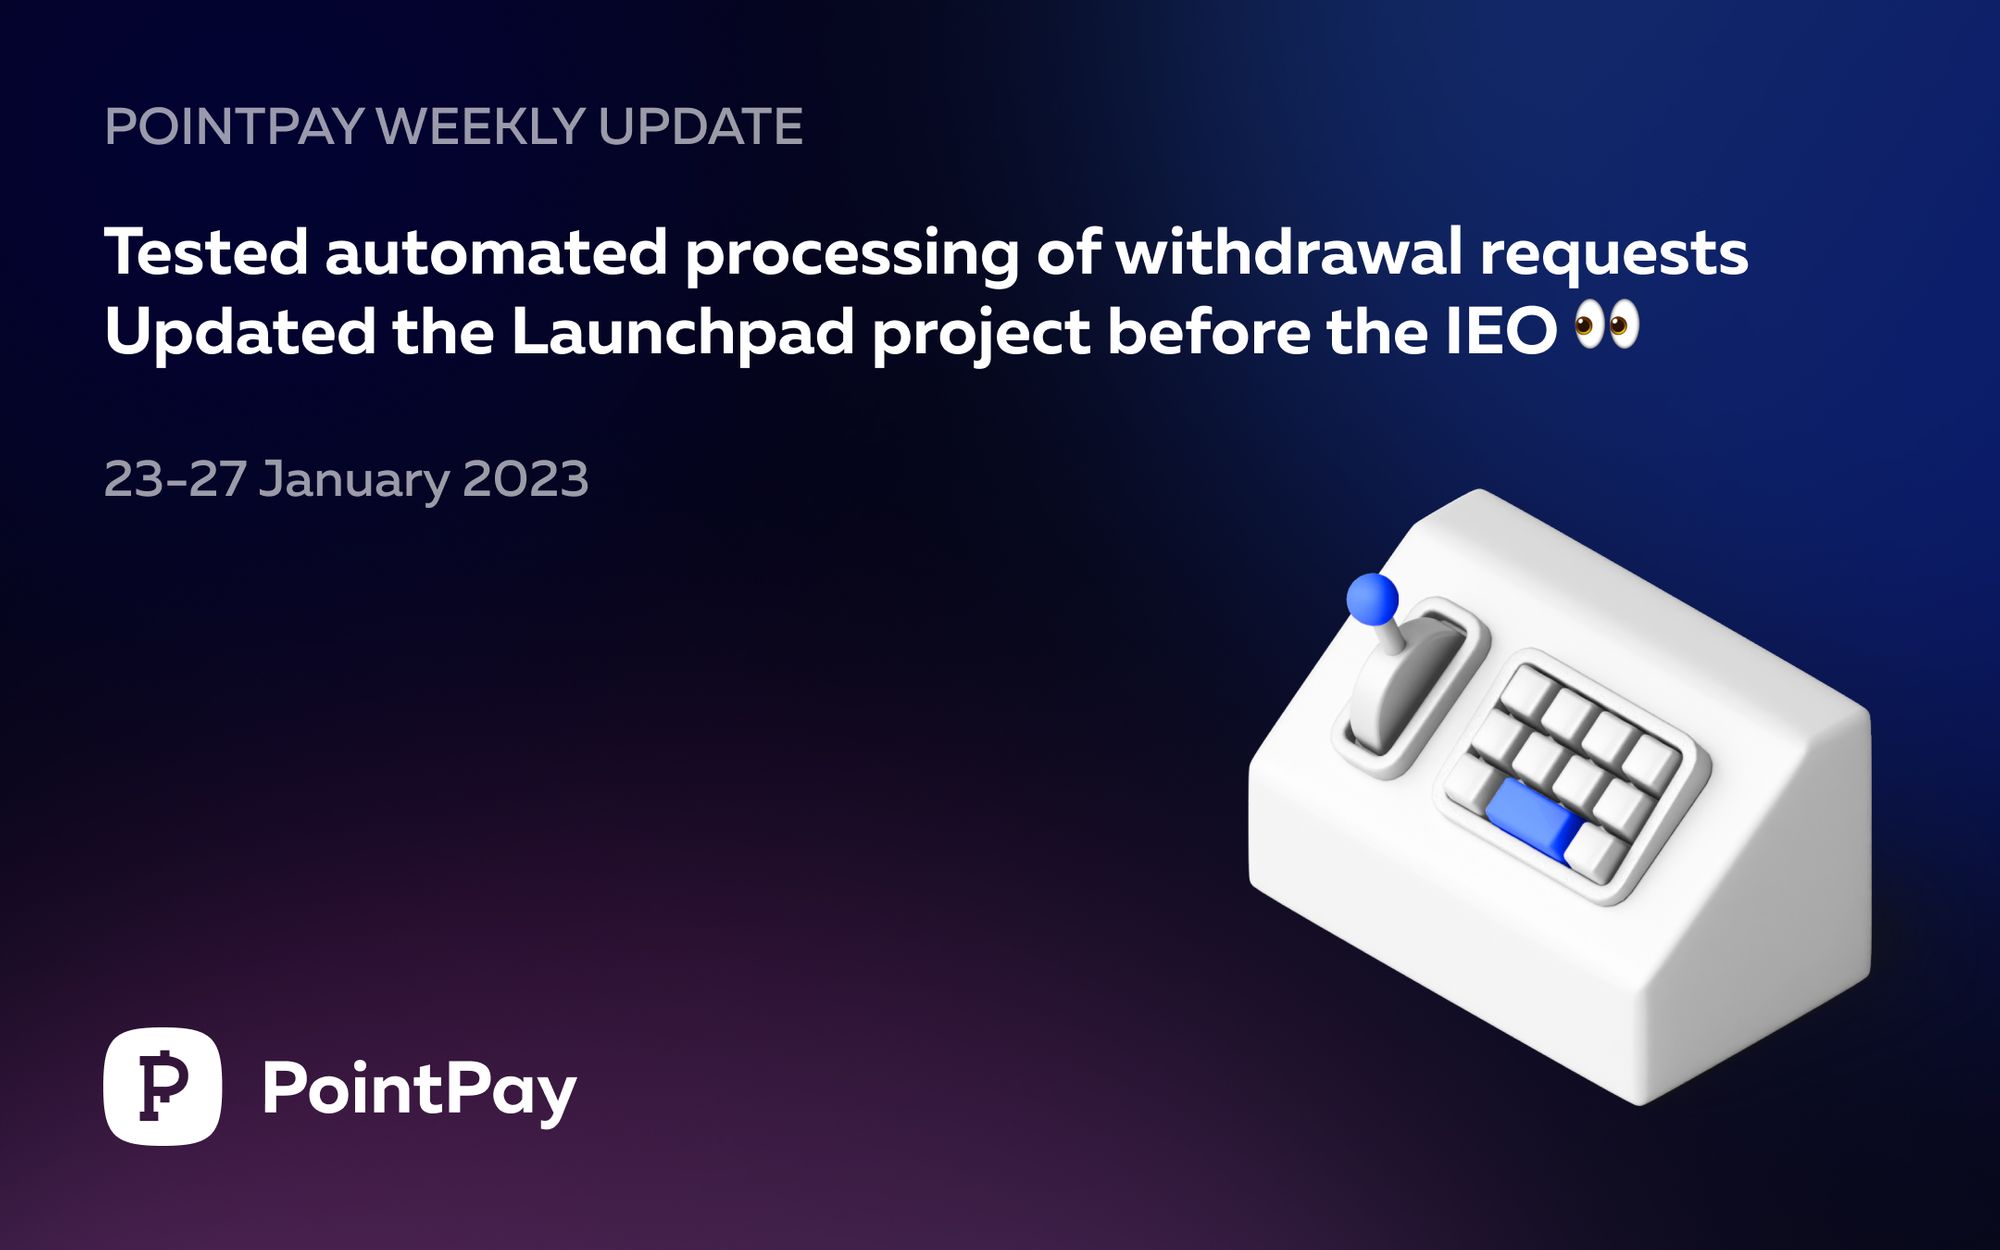 PointPay Weekly Update (23 - 27 January 2023)